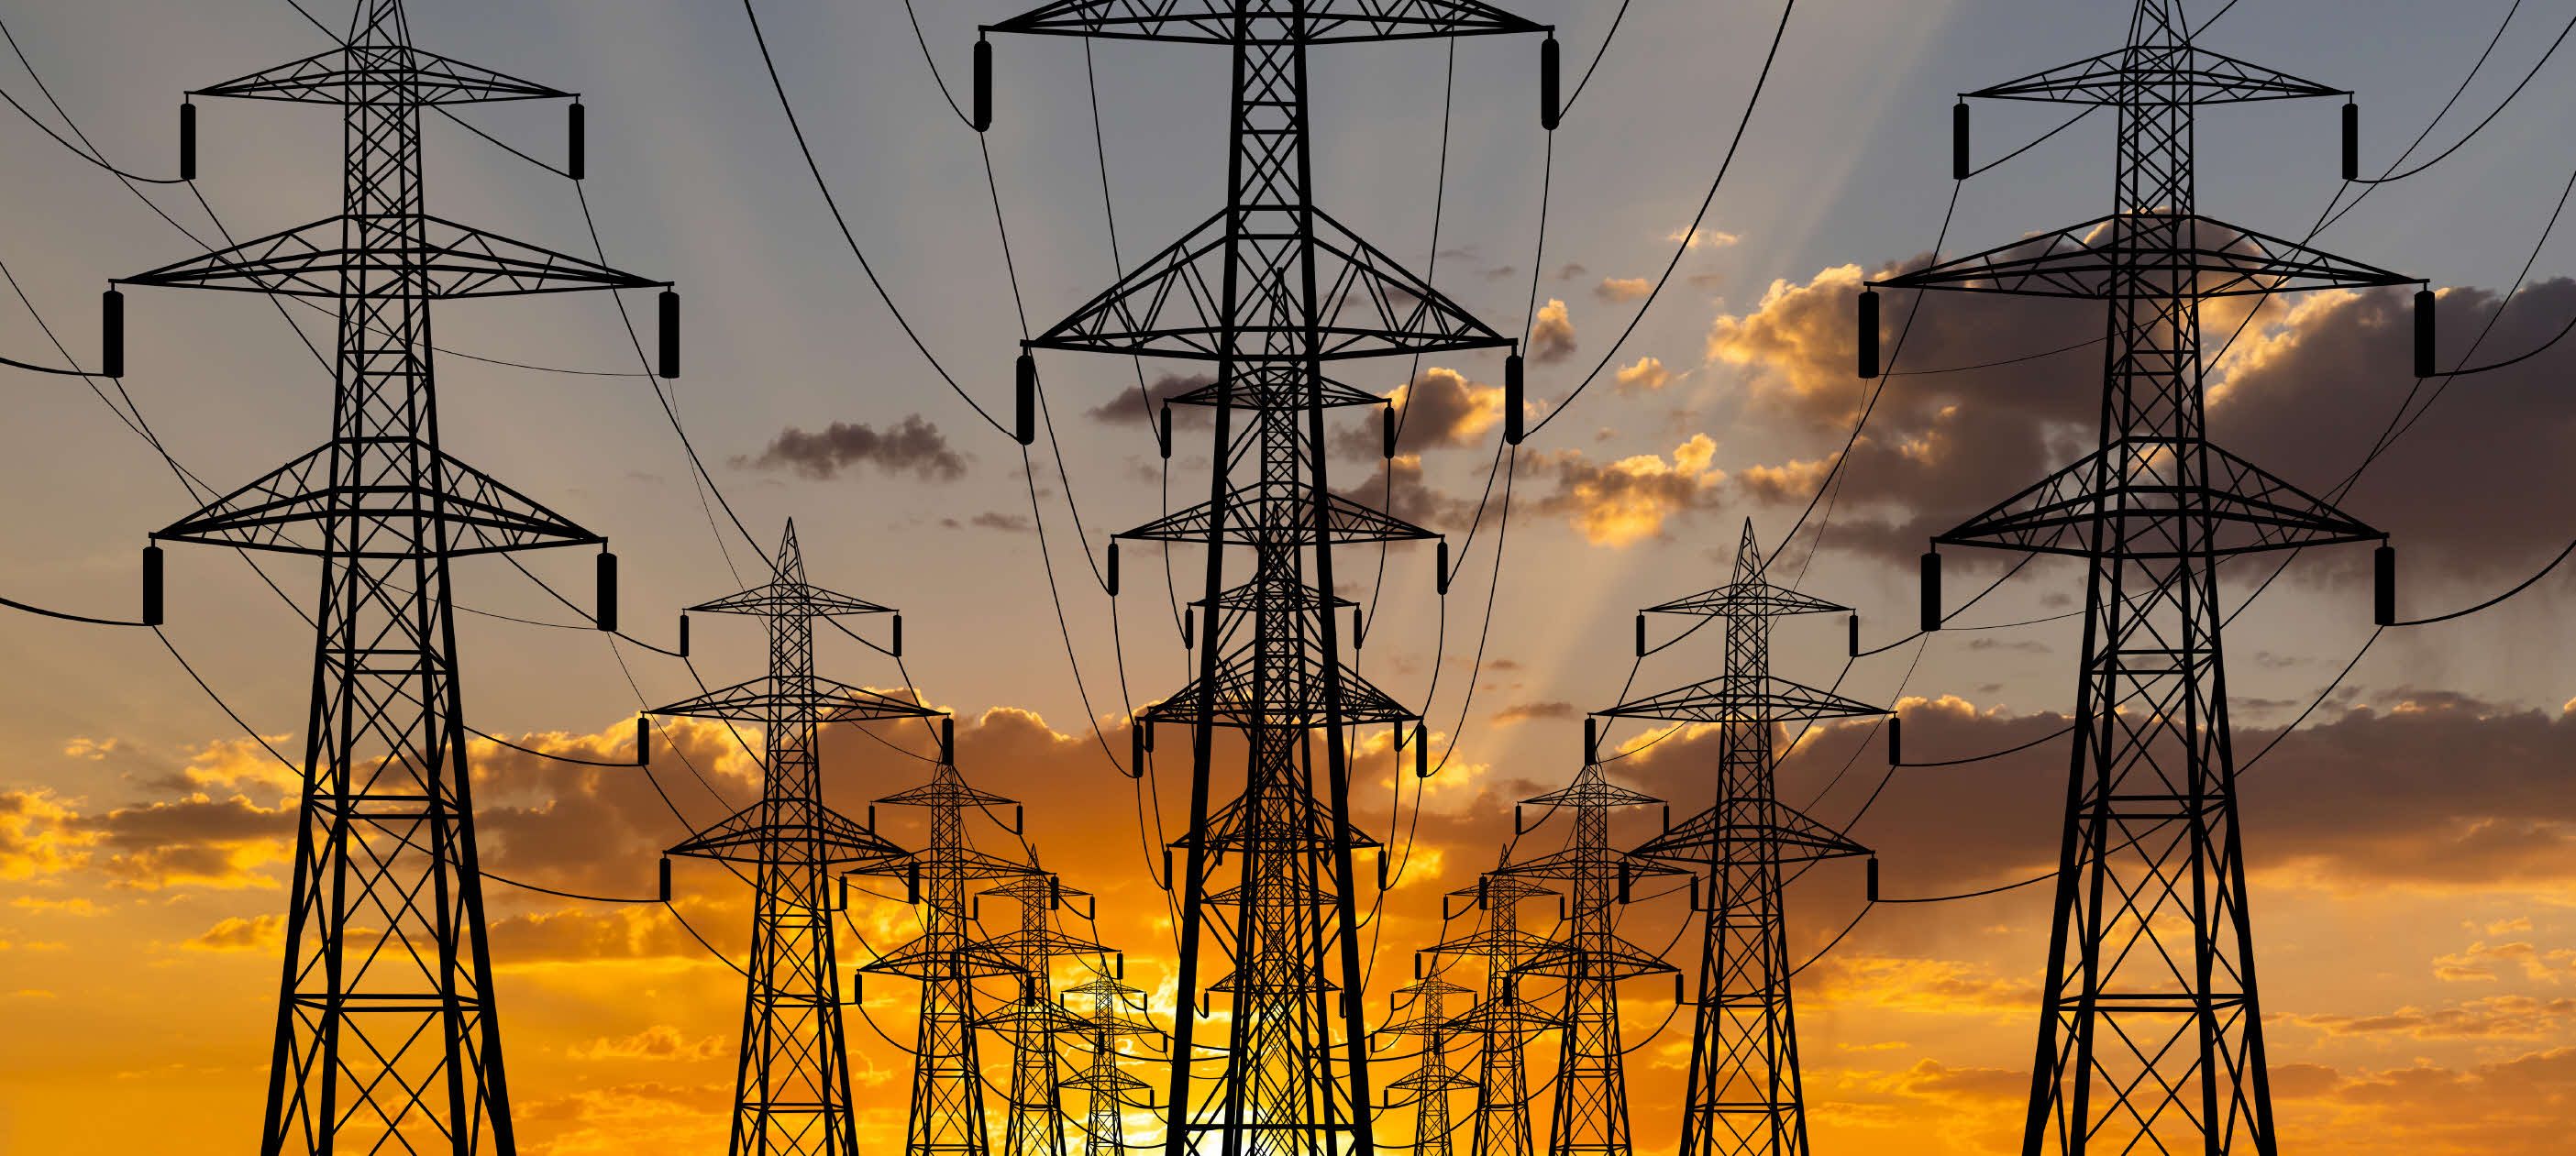 Enabling energy transmission sector growth